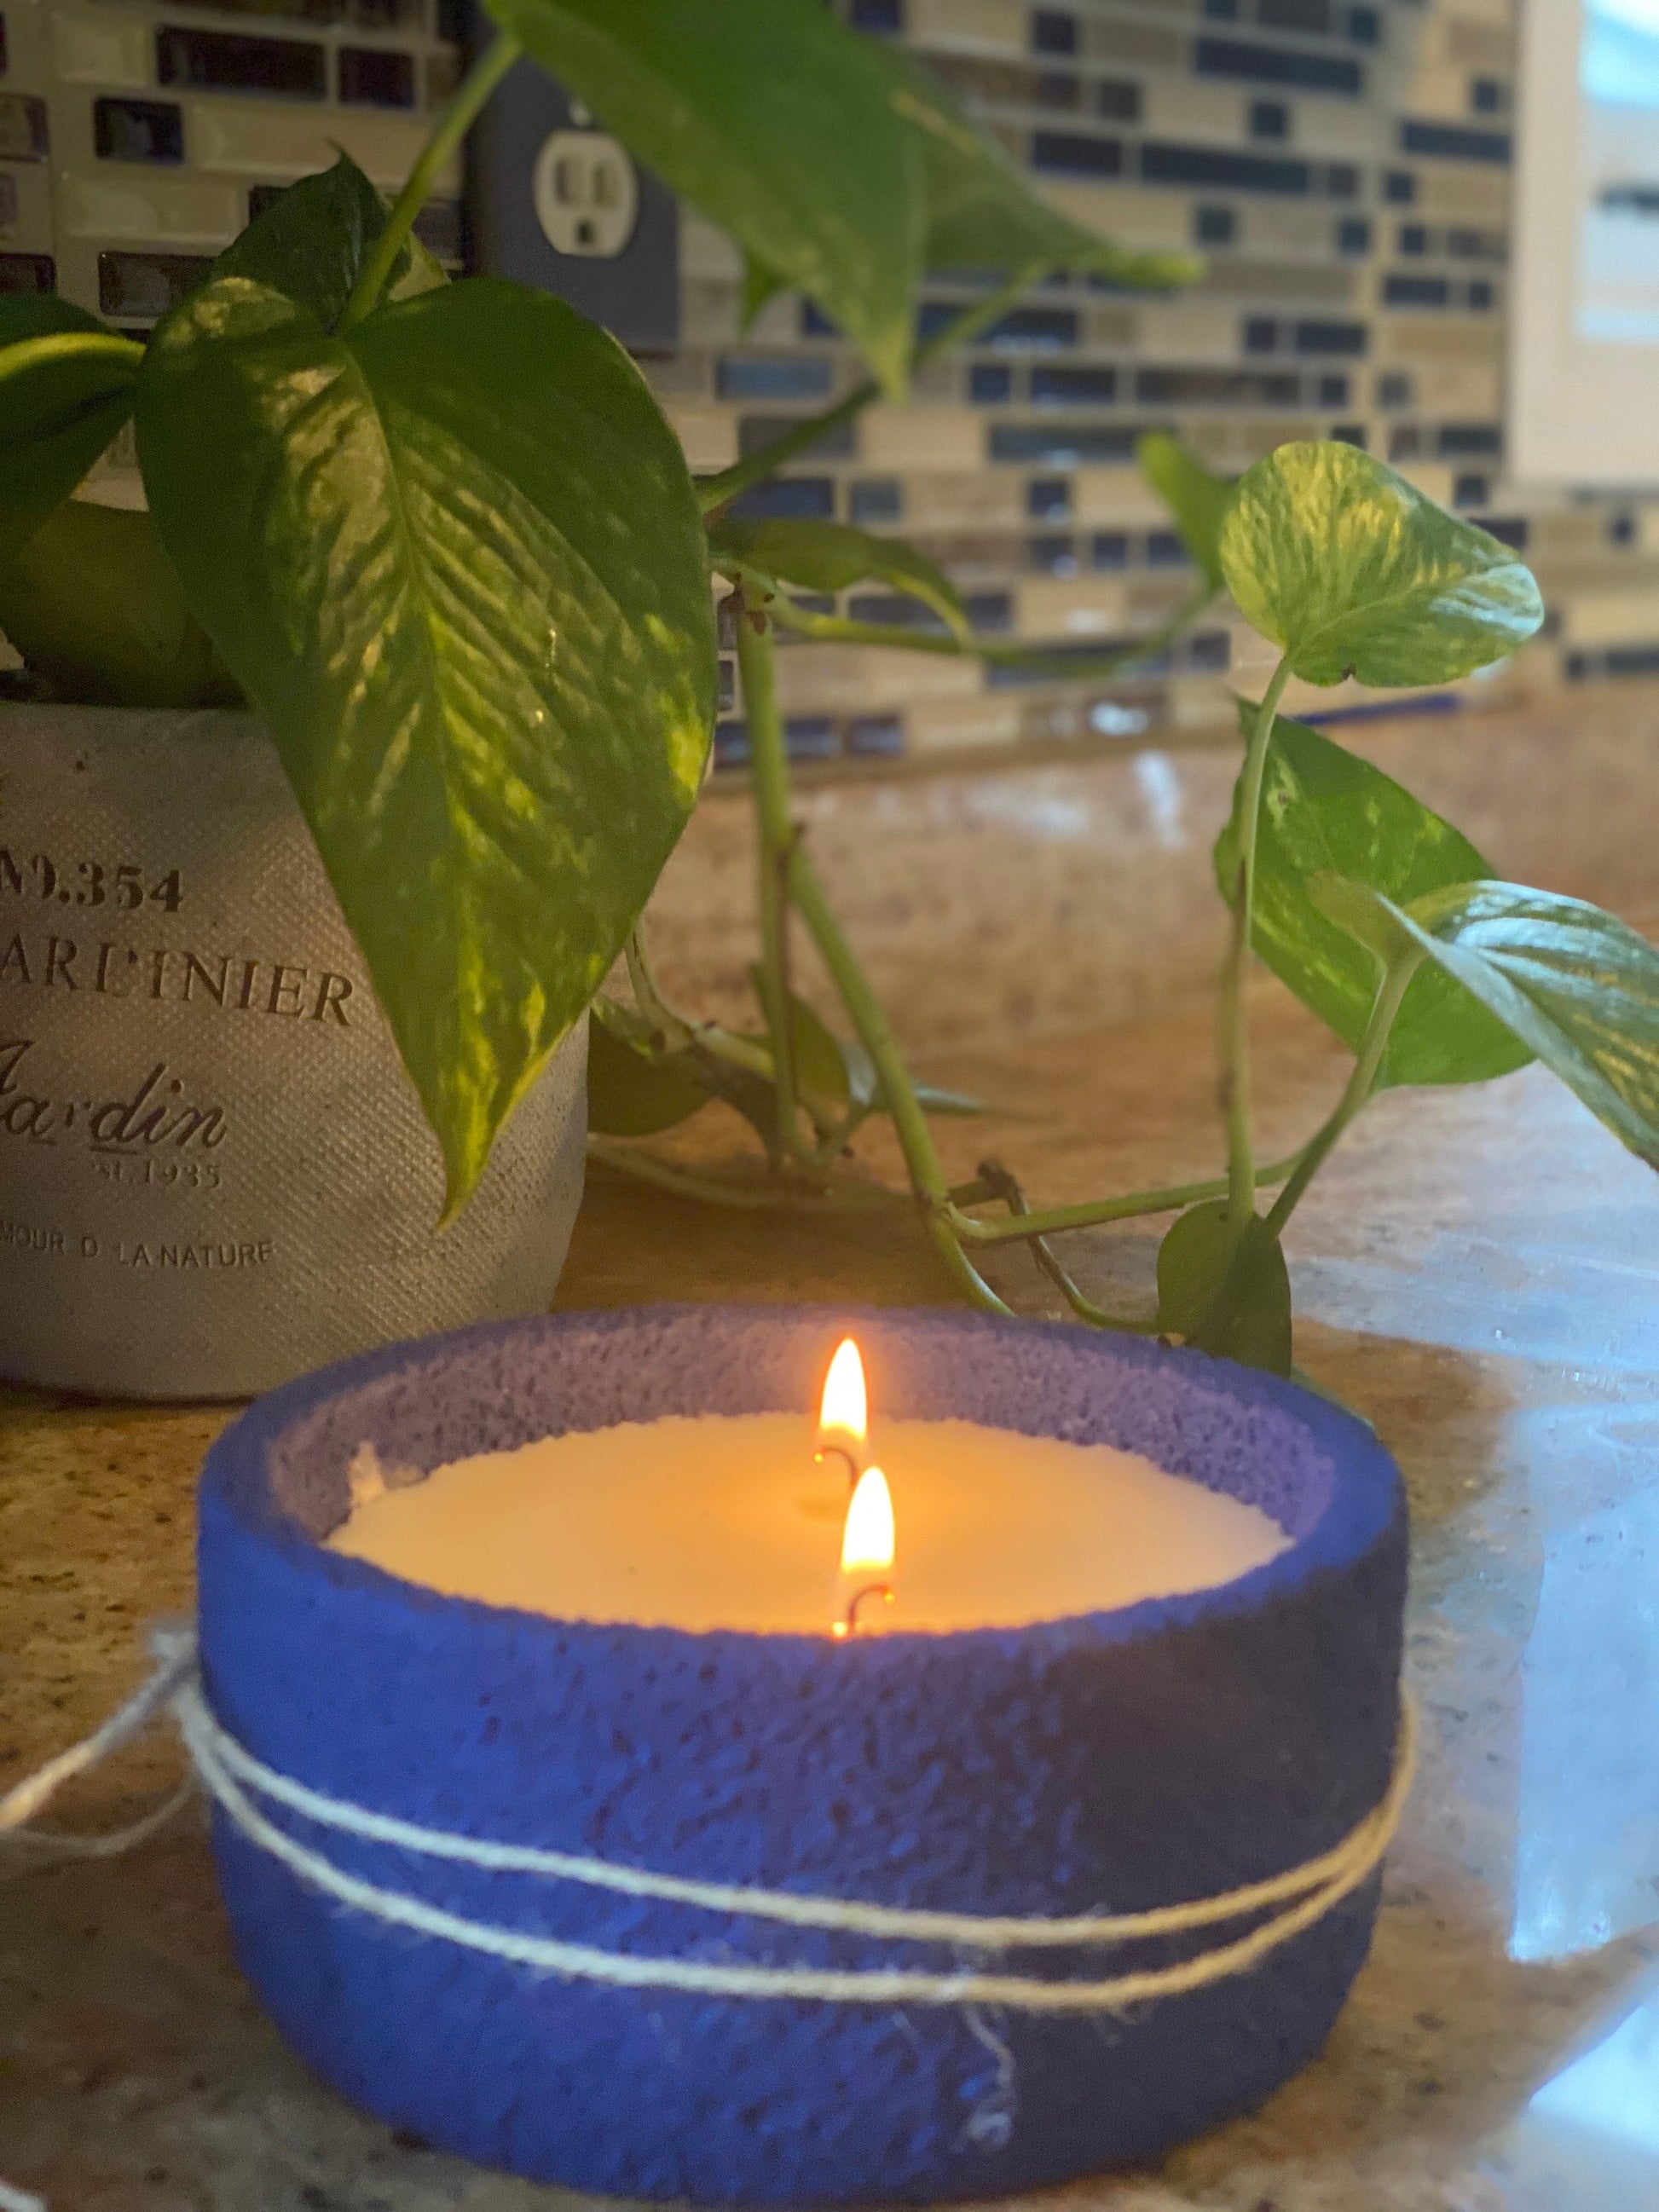 Limited Edition Candles Kindled Souls (5 Available Scents) - The Sankalpa Project